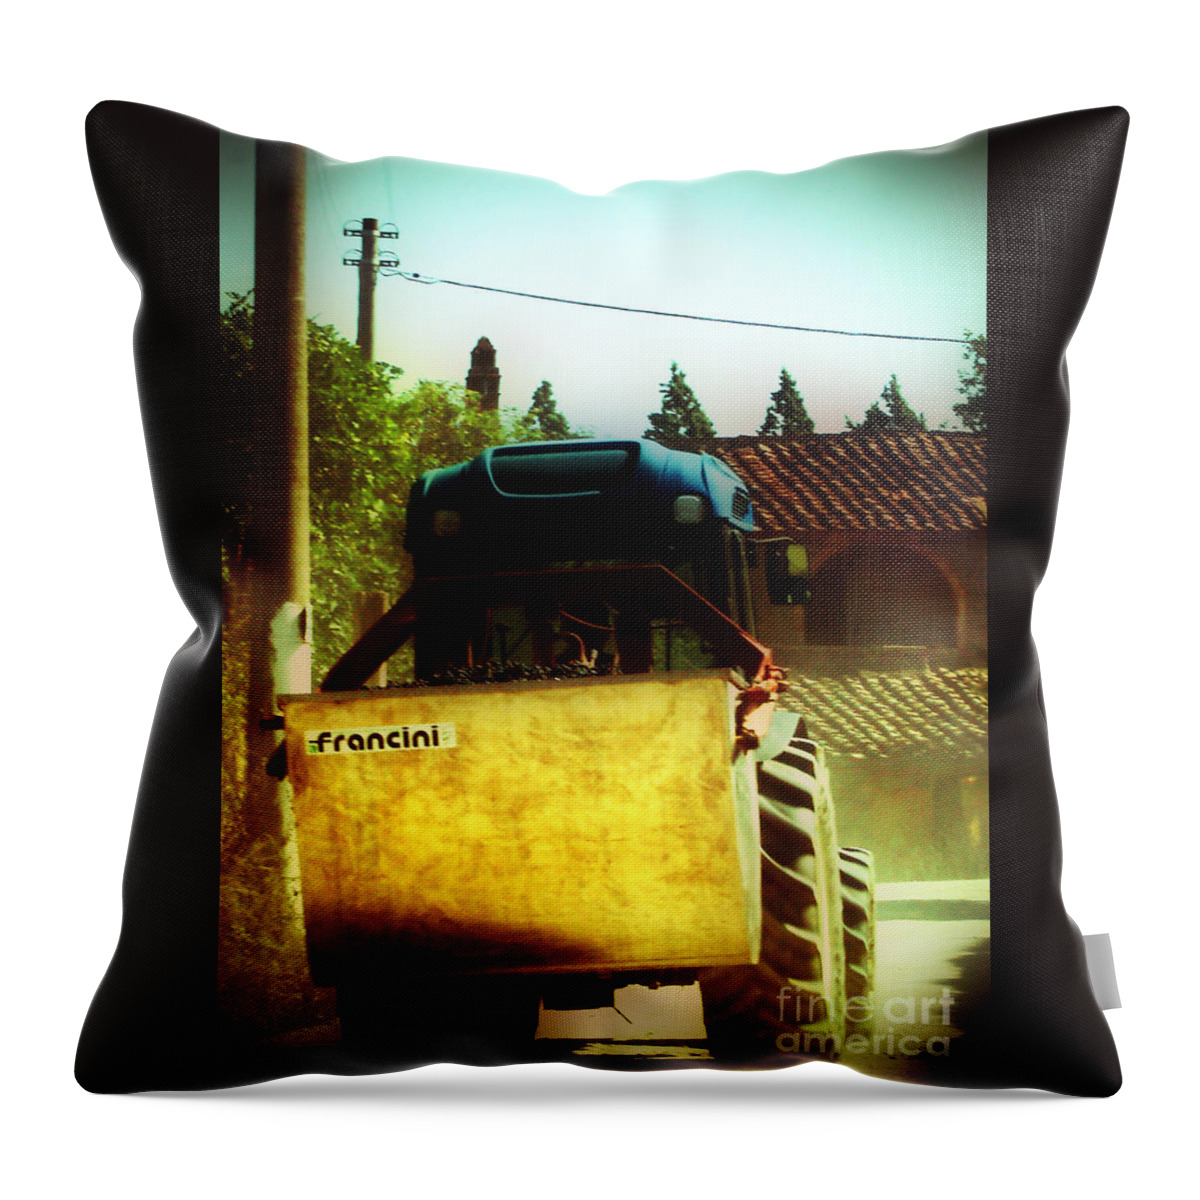 Brunello Throw Pillow featuring the photograph Brunello Taxi by Angela DeFrias